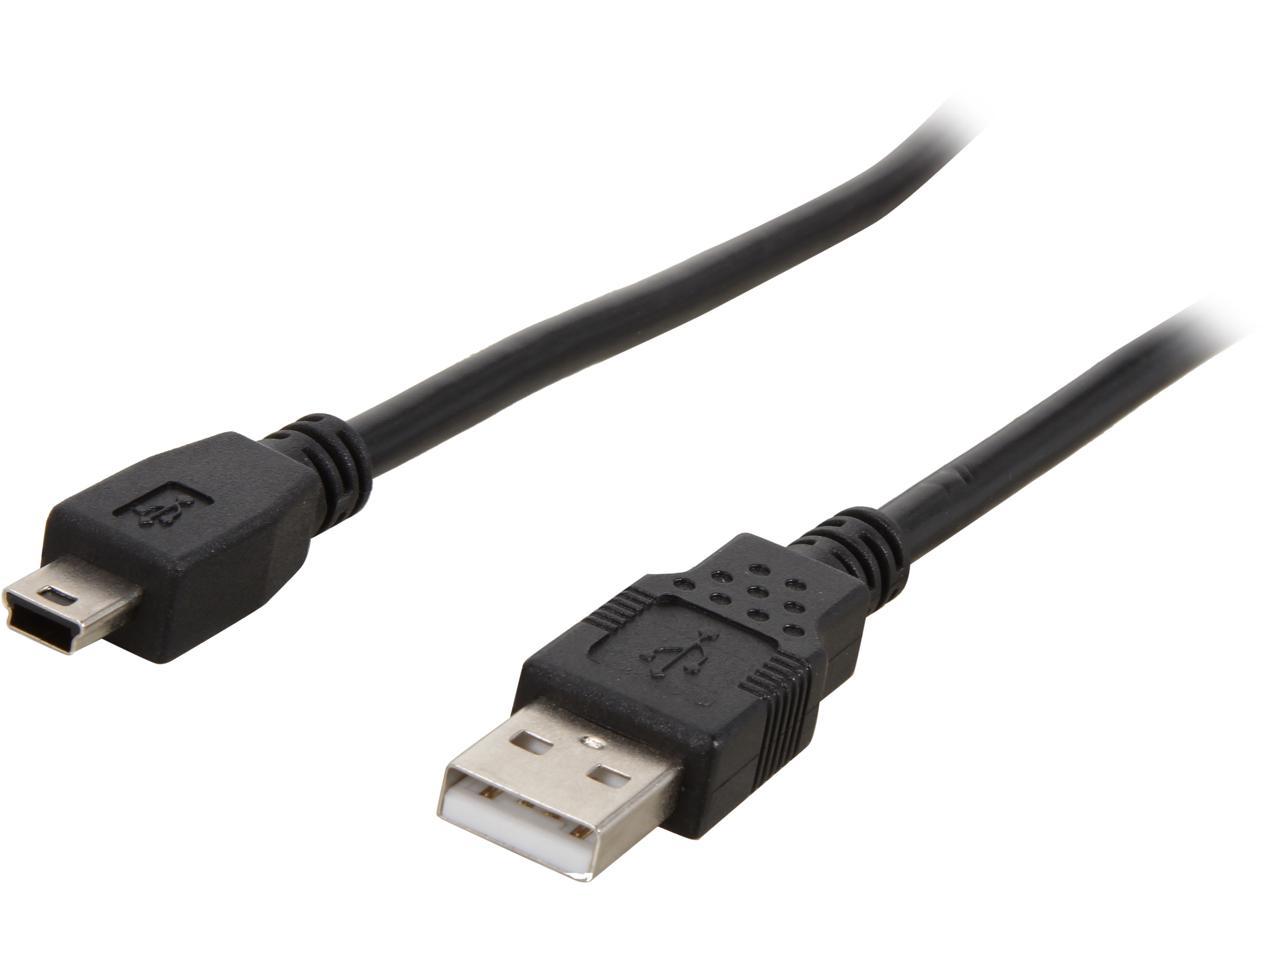 V7 Black USB Cable USB 2.0 A Male to USB 2.0 B Male 5m 16.4ft